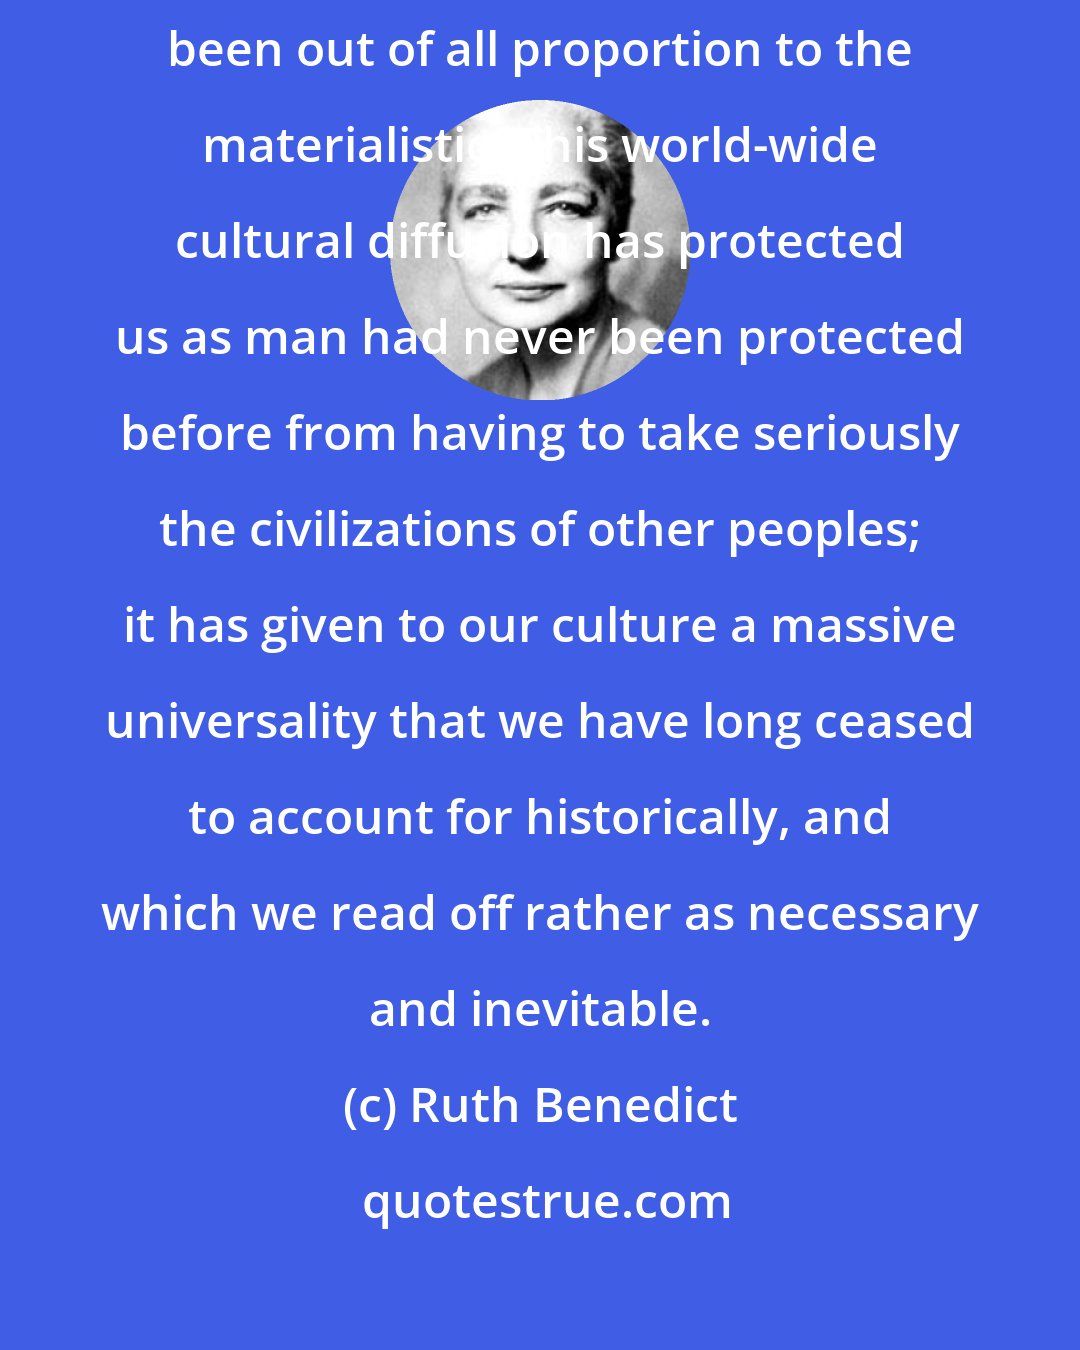 Ruth Benedict: The psychological consequences of this spread of white culture have been out of all proportion to the materialistic. This world-wide cultural diffusion has protected us as man had never been protected before from having to take seriously the civilizations of other peoples; it has given to our culture a massive universality that we have long ceased to account for historically, and which we read off rather as necessary and inevitable.